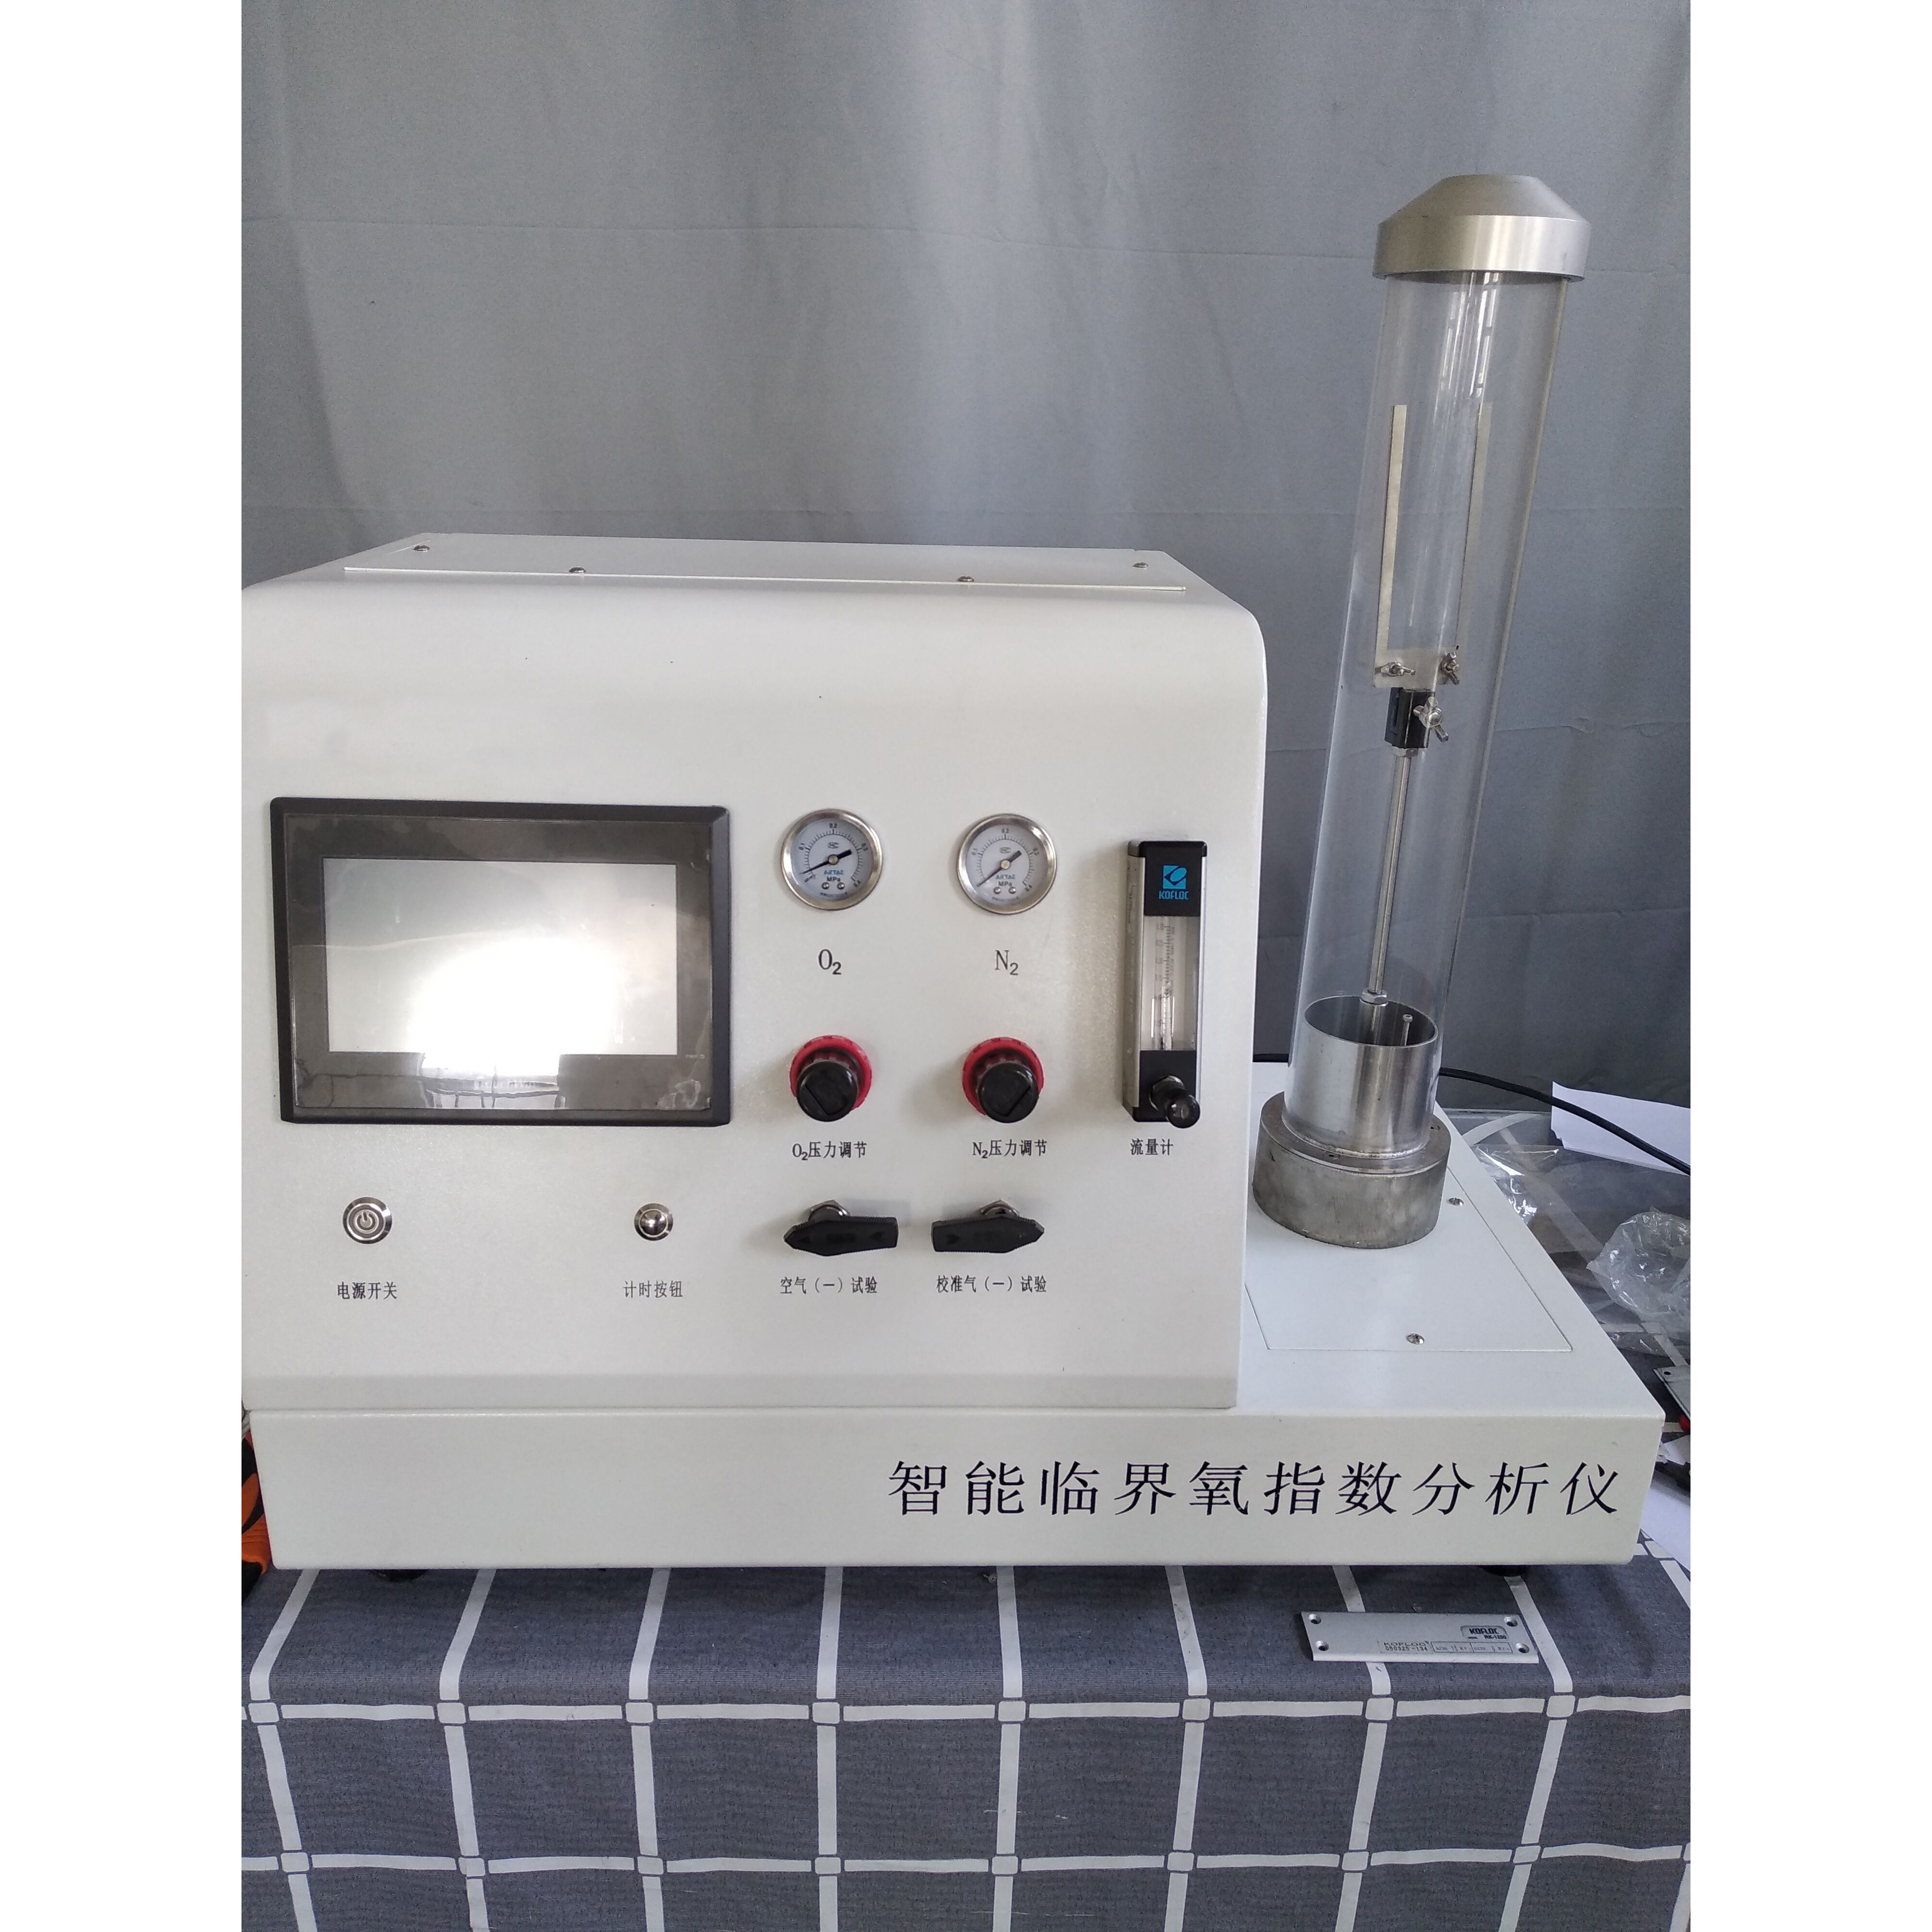 ISO 4589-2 Limited / Limiting Oxygen Index Tester, ISO 4589-3 Elevatd-Temperature Oxygen Index Tester